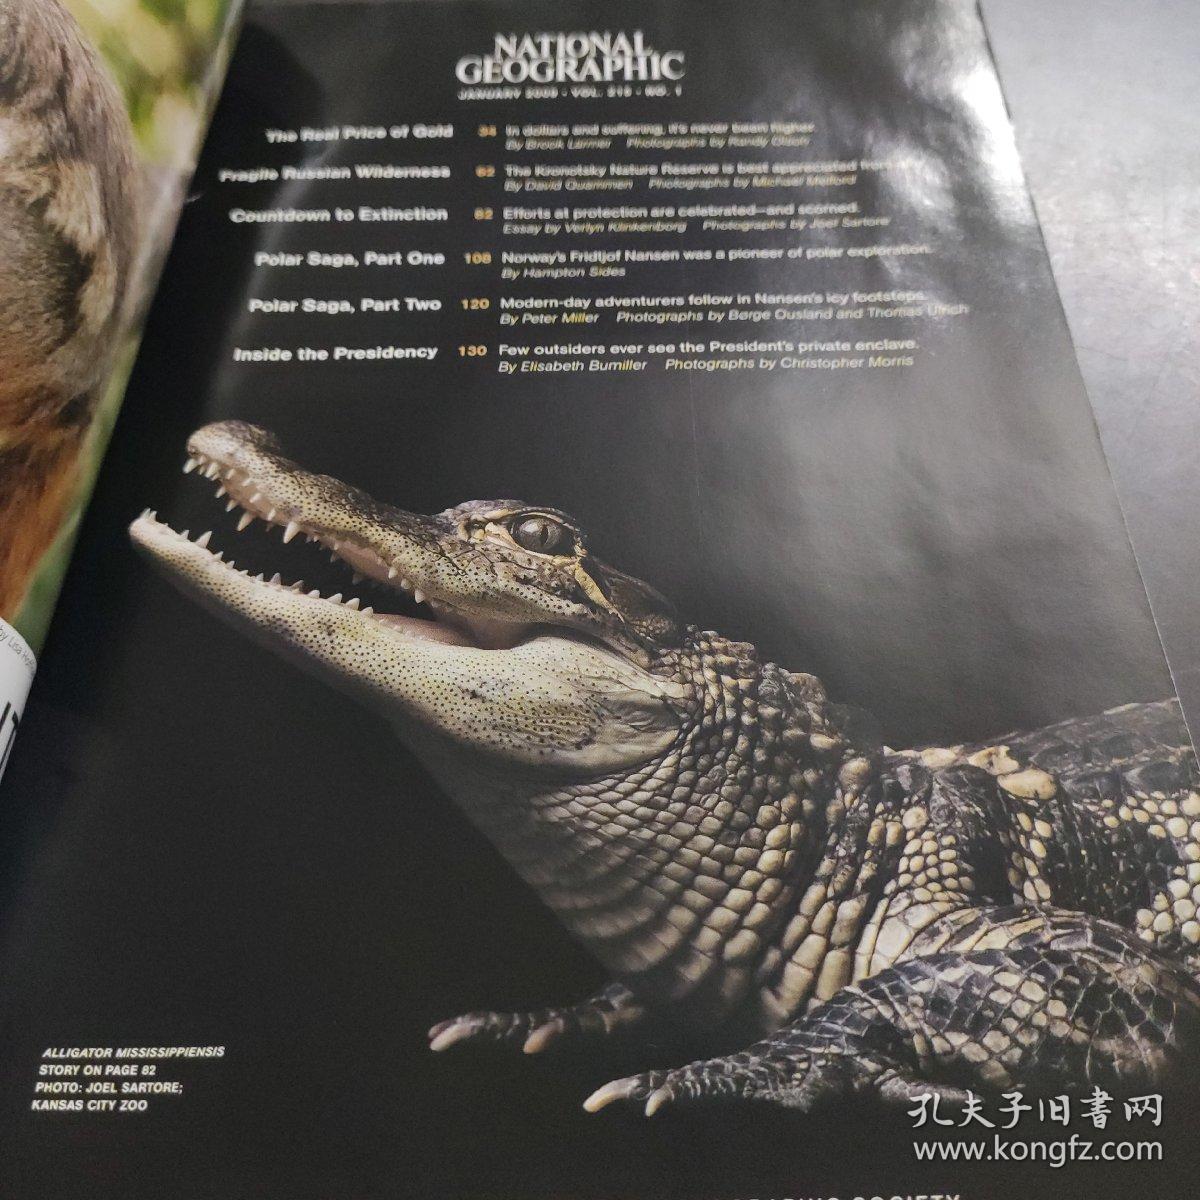 National geographic 200901